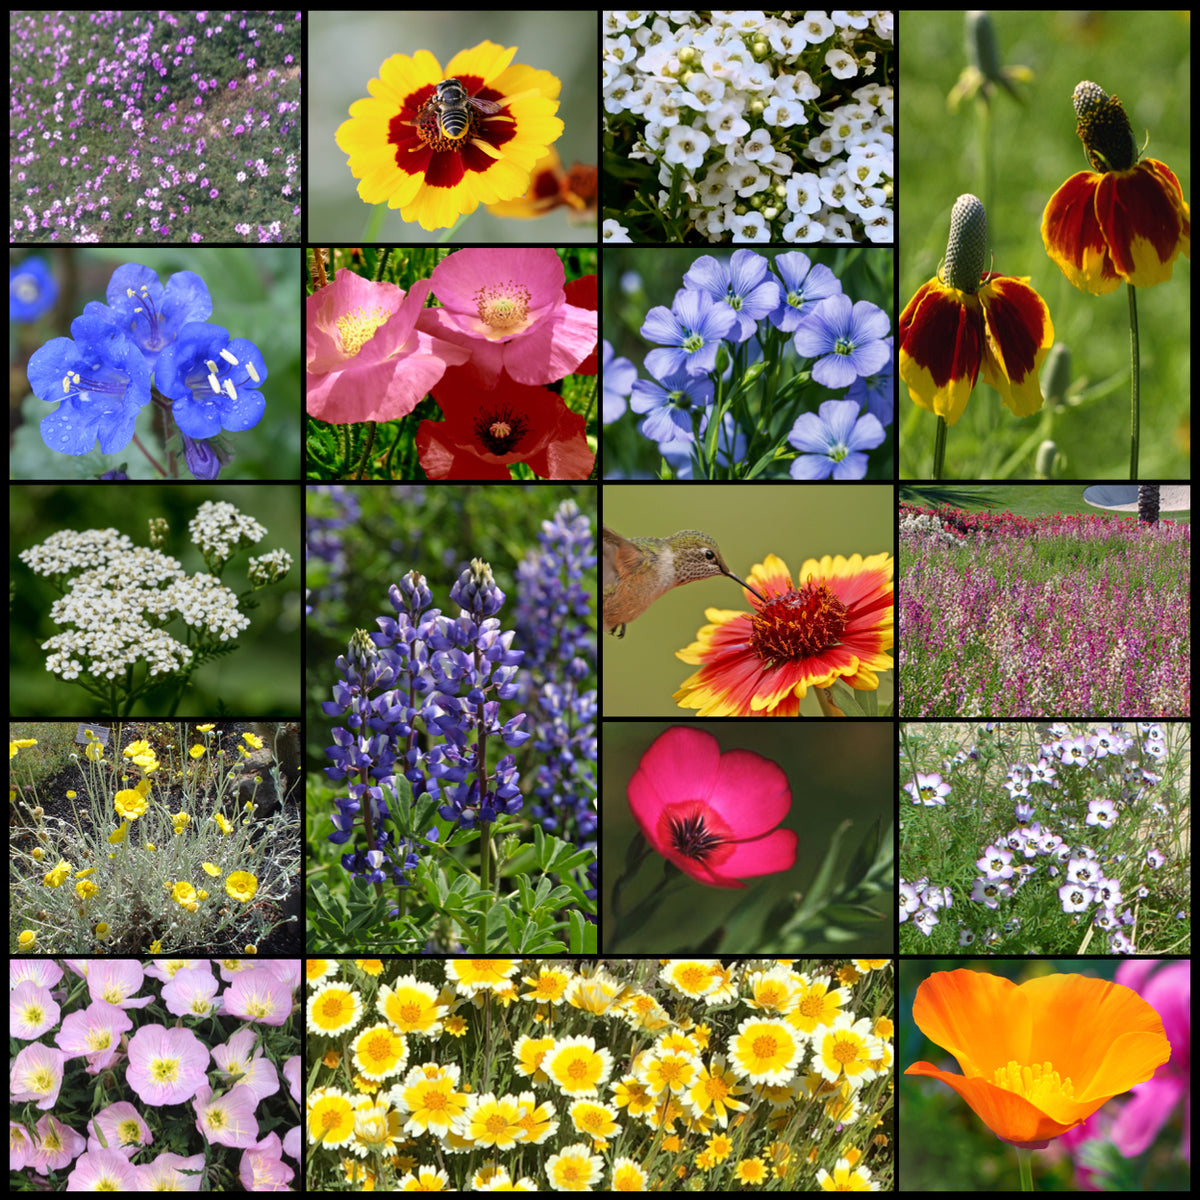 Drought Tolerant Flower Seed Collection - Xeriscape Rock Garden – Sow Right  Seeds